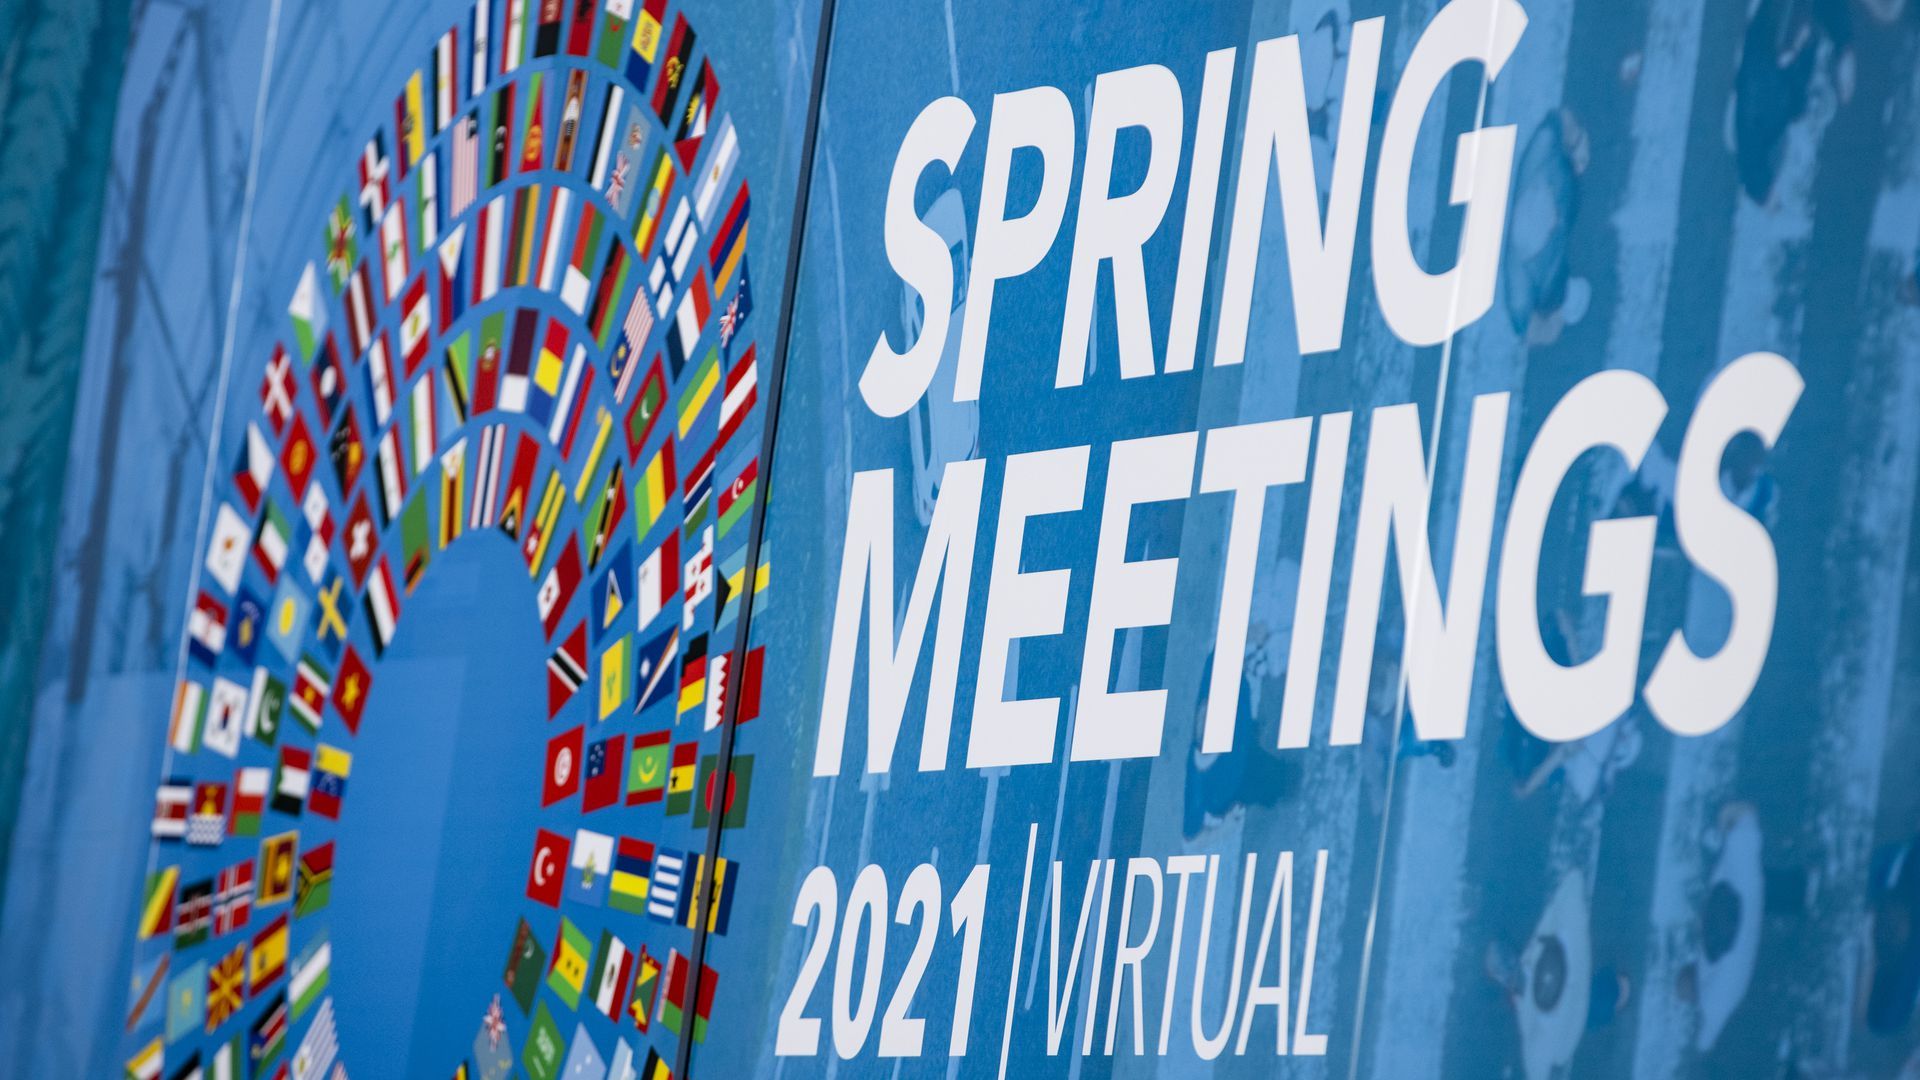 Photo of a wall that says "Spring meetings 2021 virtual"